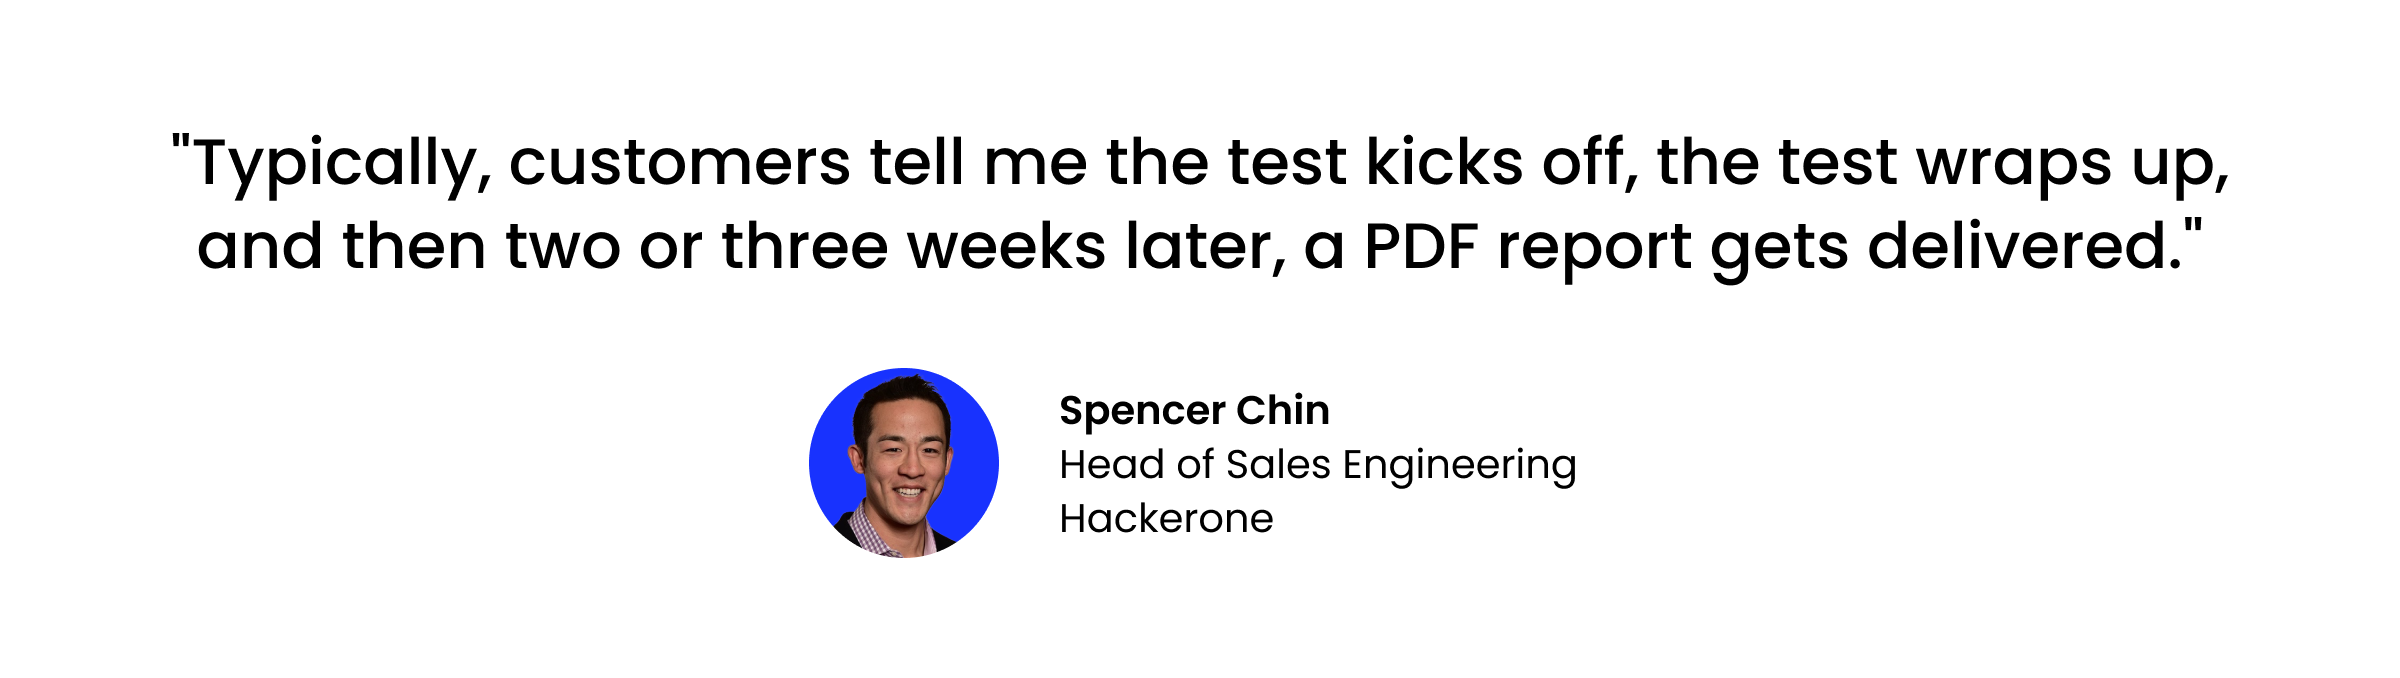 “Typically, customers tell me the test kicks off, the test wraps up, and then two or three weeks later, a PDF report gets delivered.”